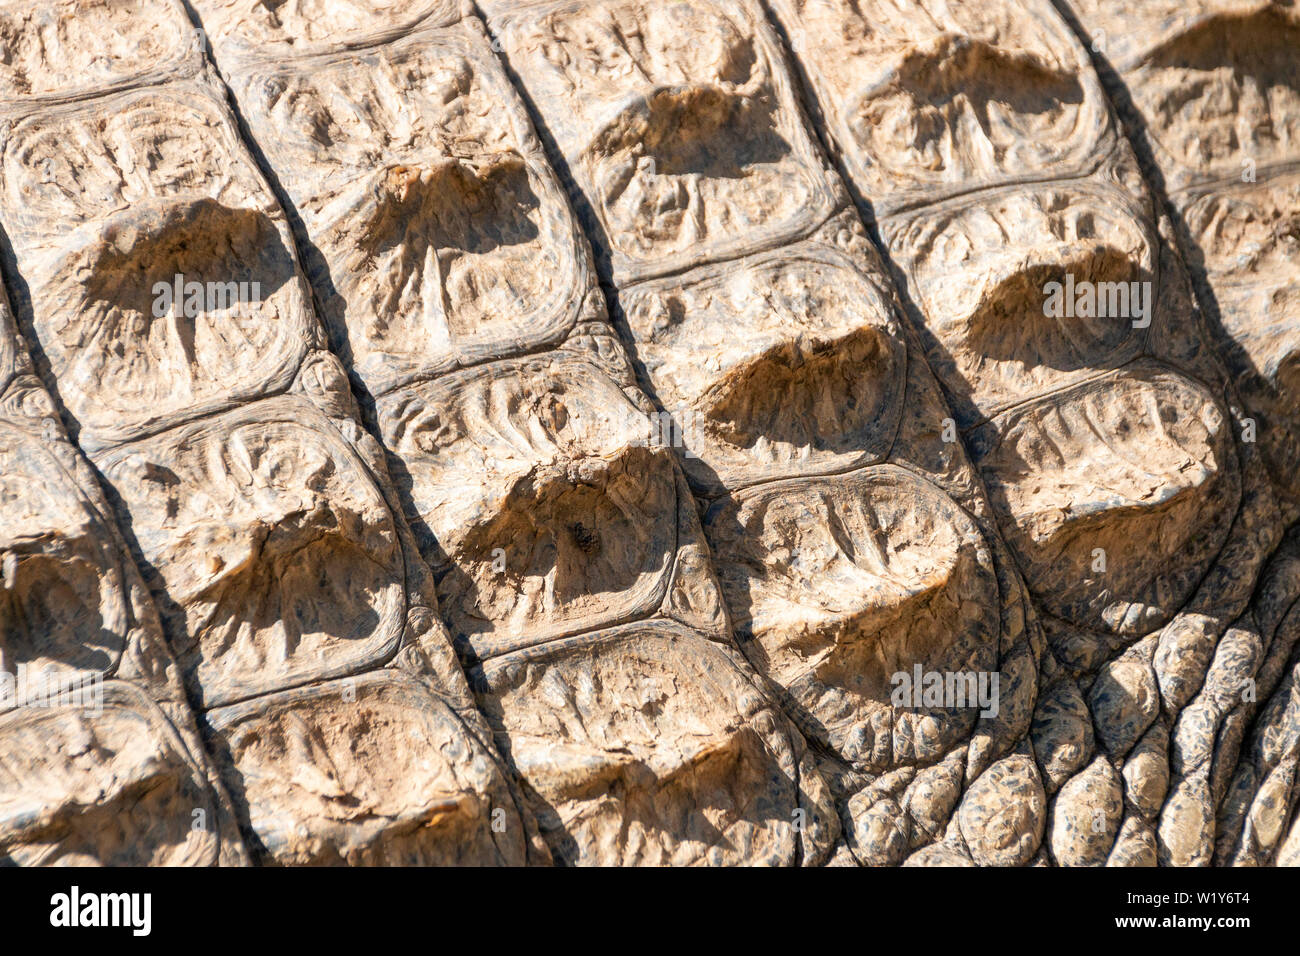 A close up view of the scales on the back of a crocodile Stock Photo